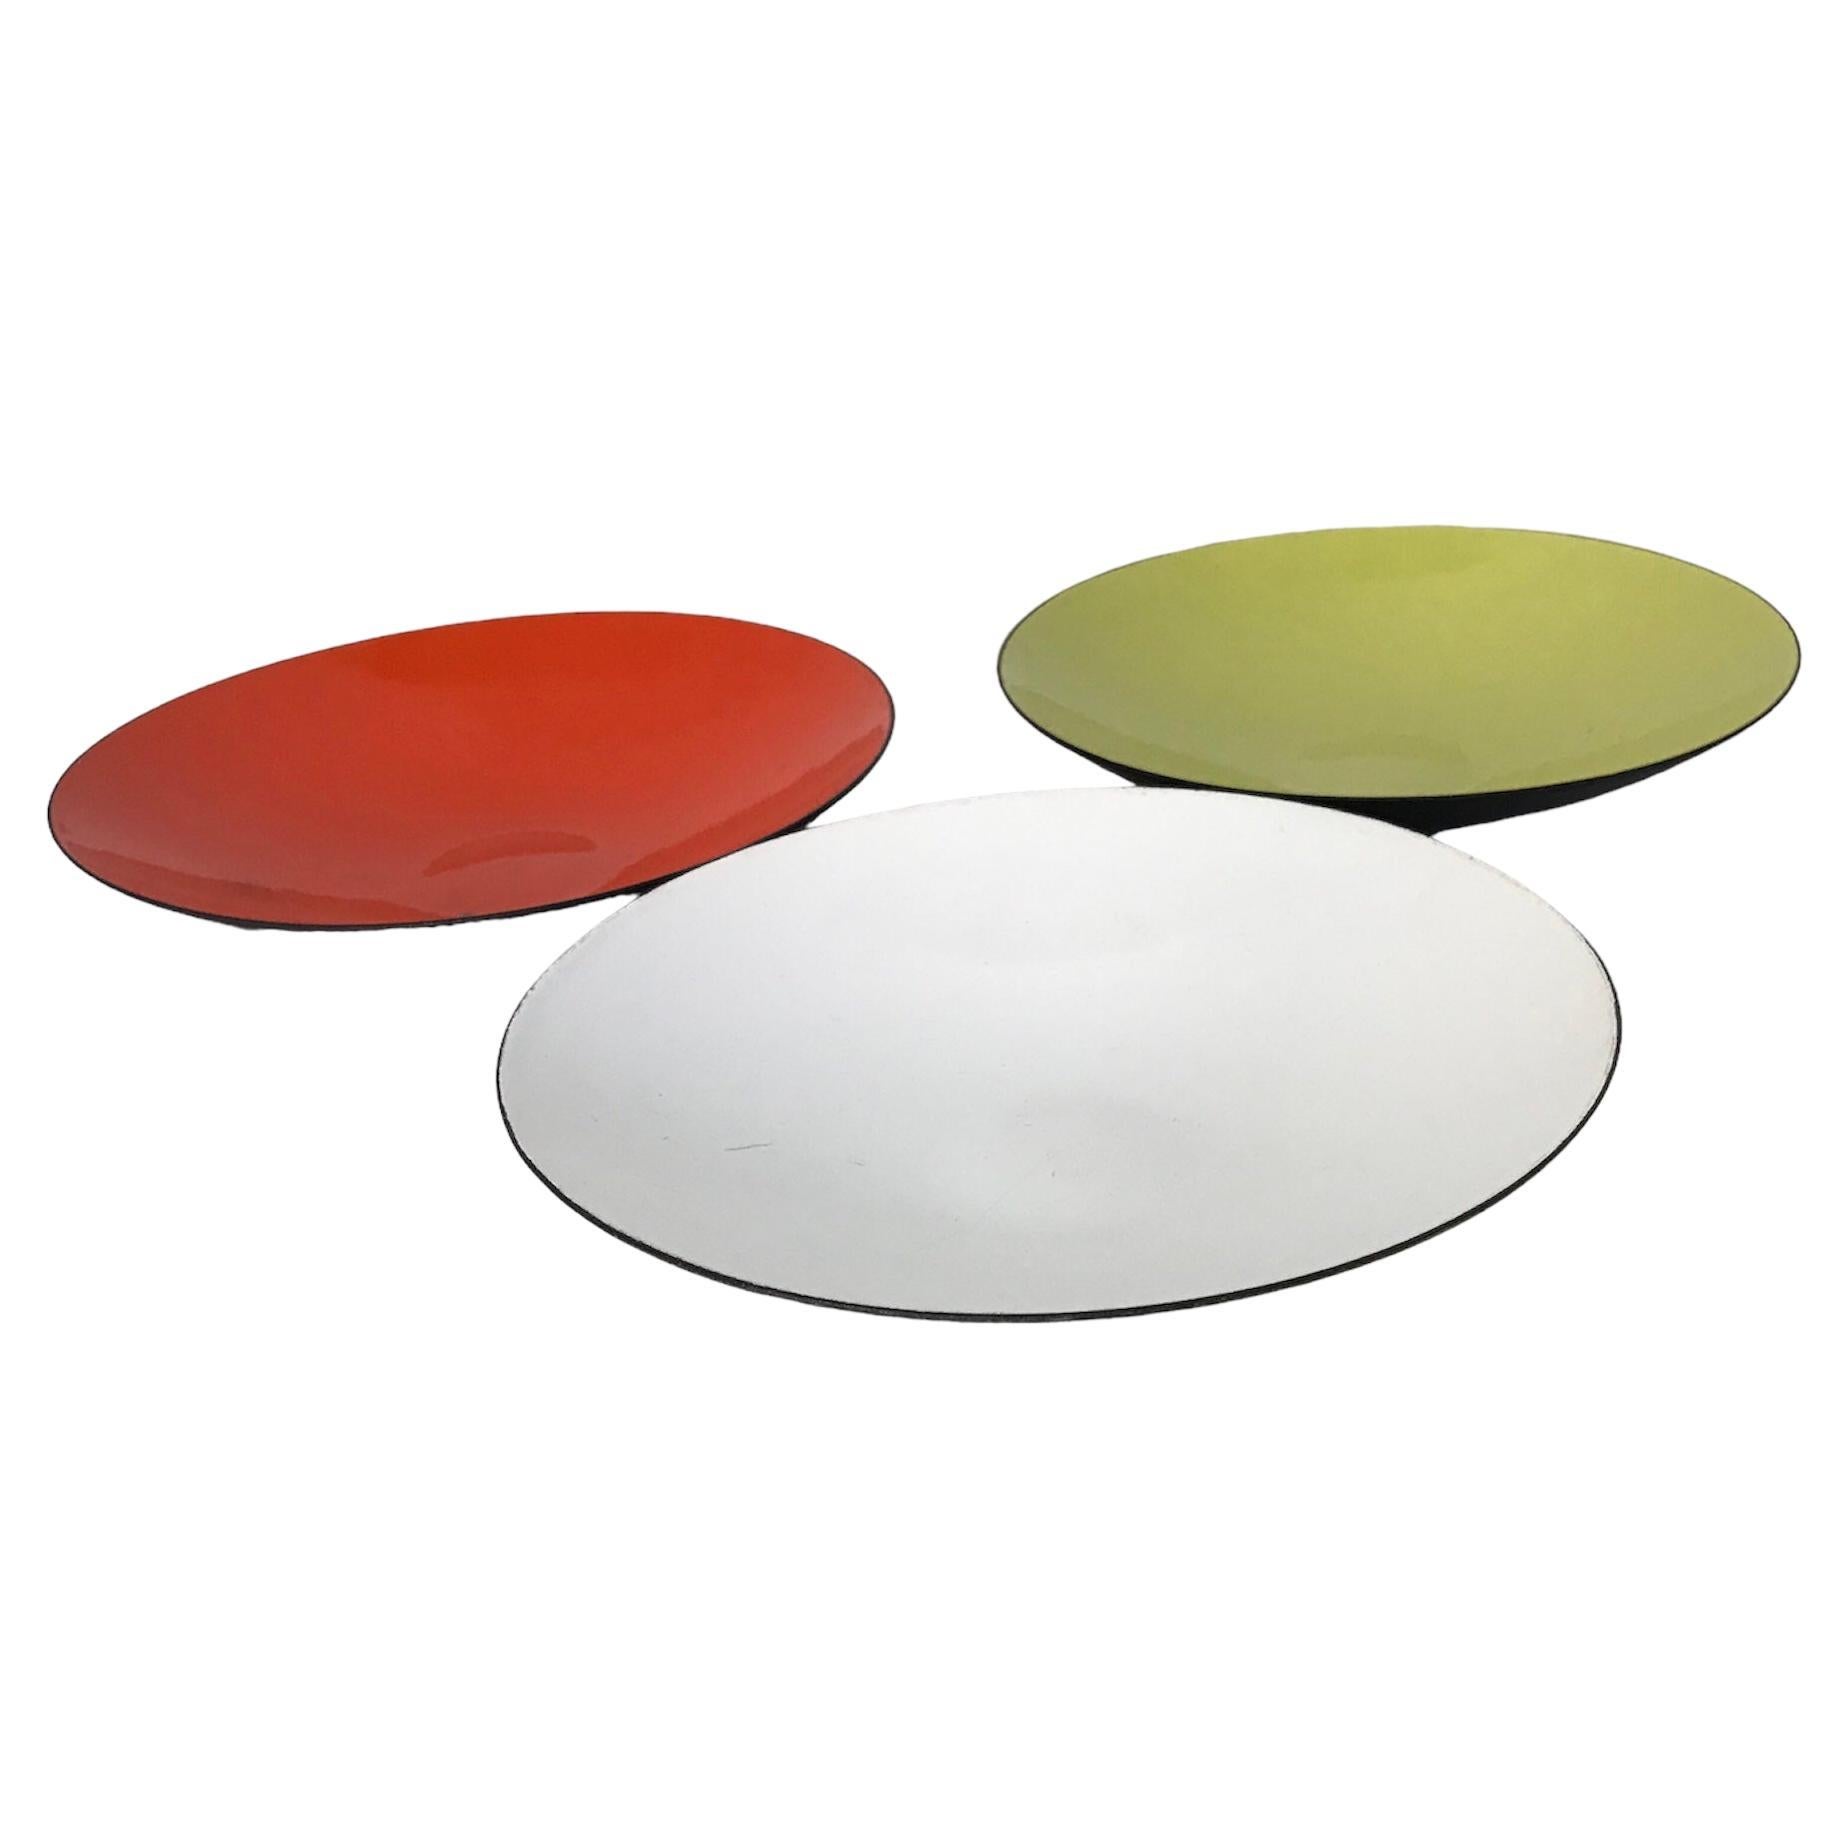 Herbert Krenchel designed rare 1950s vintage set of 3 Krenit flat dishes, 1.25 inches in height by 6.5 inches diameter, marketed by Torben Ørskov of Denmark.  One of each – inside color white, lime green and tomato red outside matte black.
The stamp